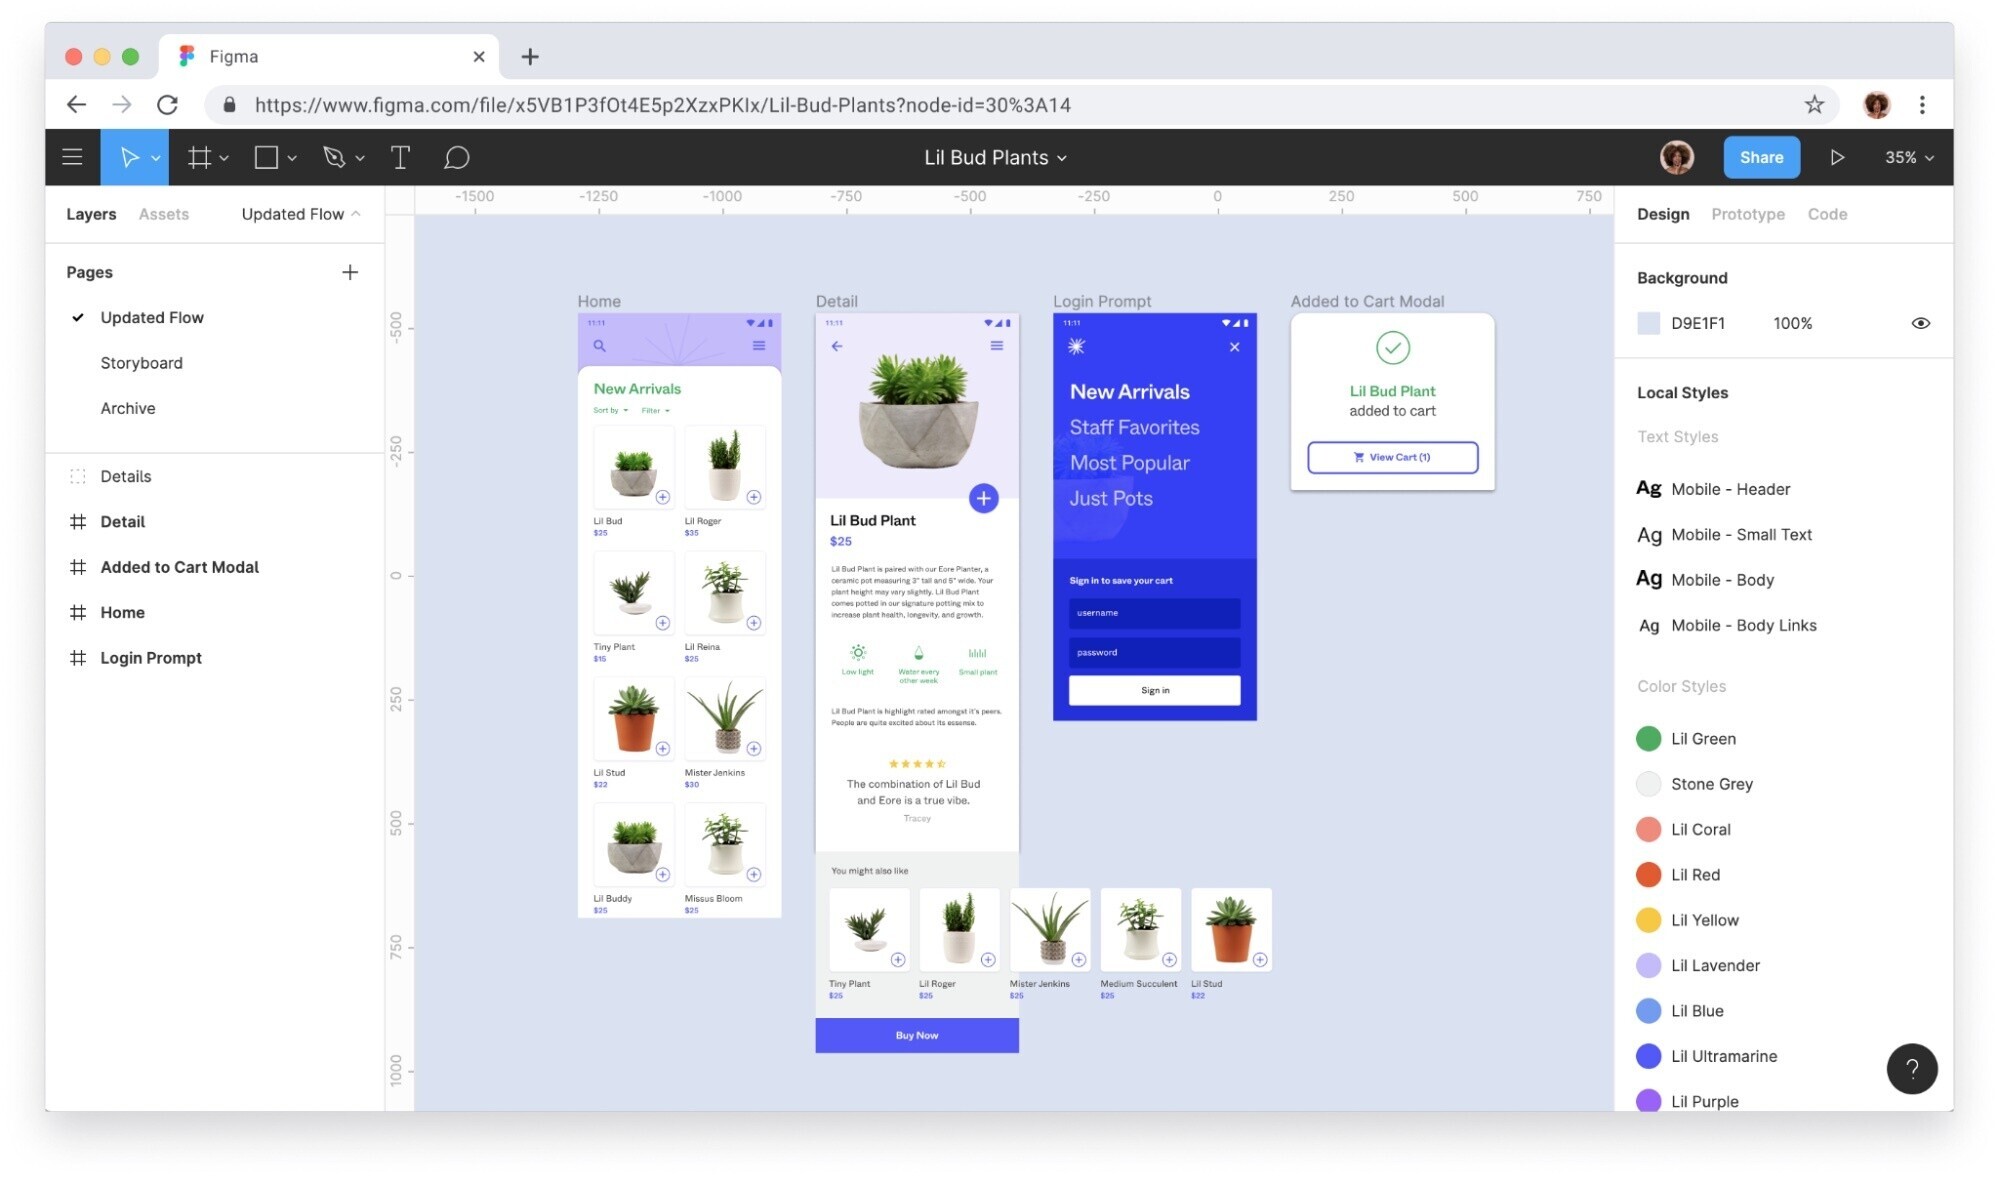 Figma’s collaborative design platform helps teams design the home, detail, and login pages of a website’s mobile version